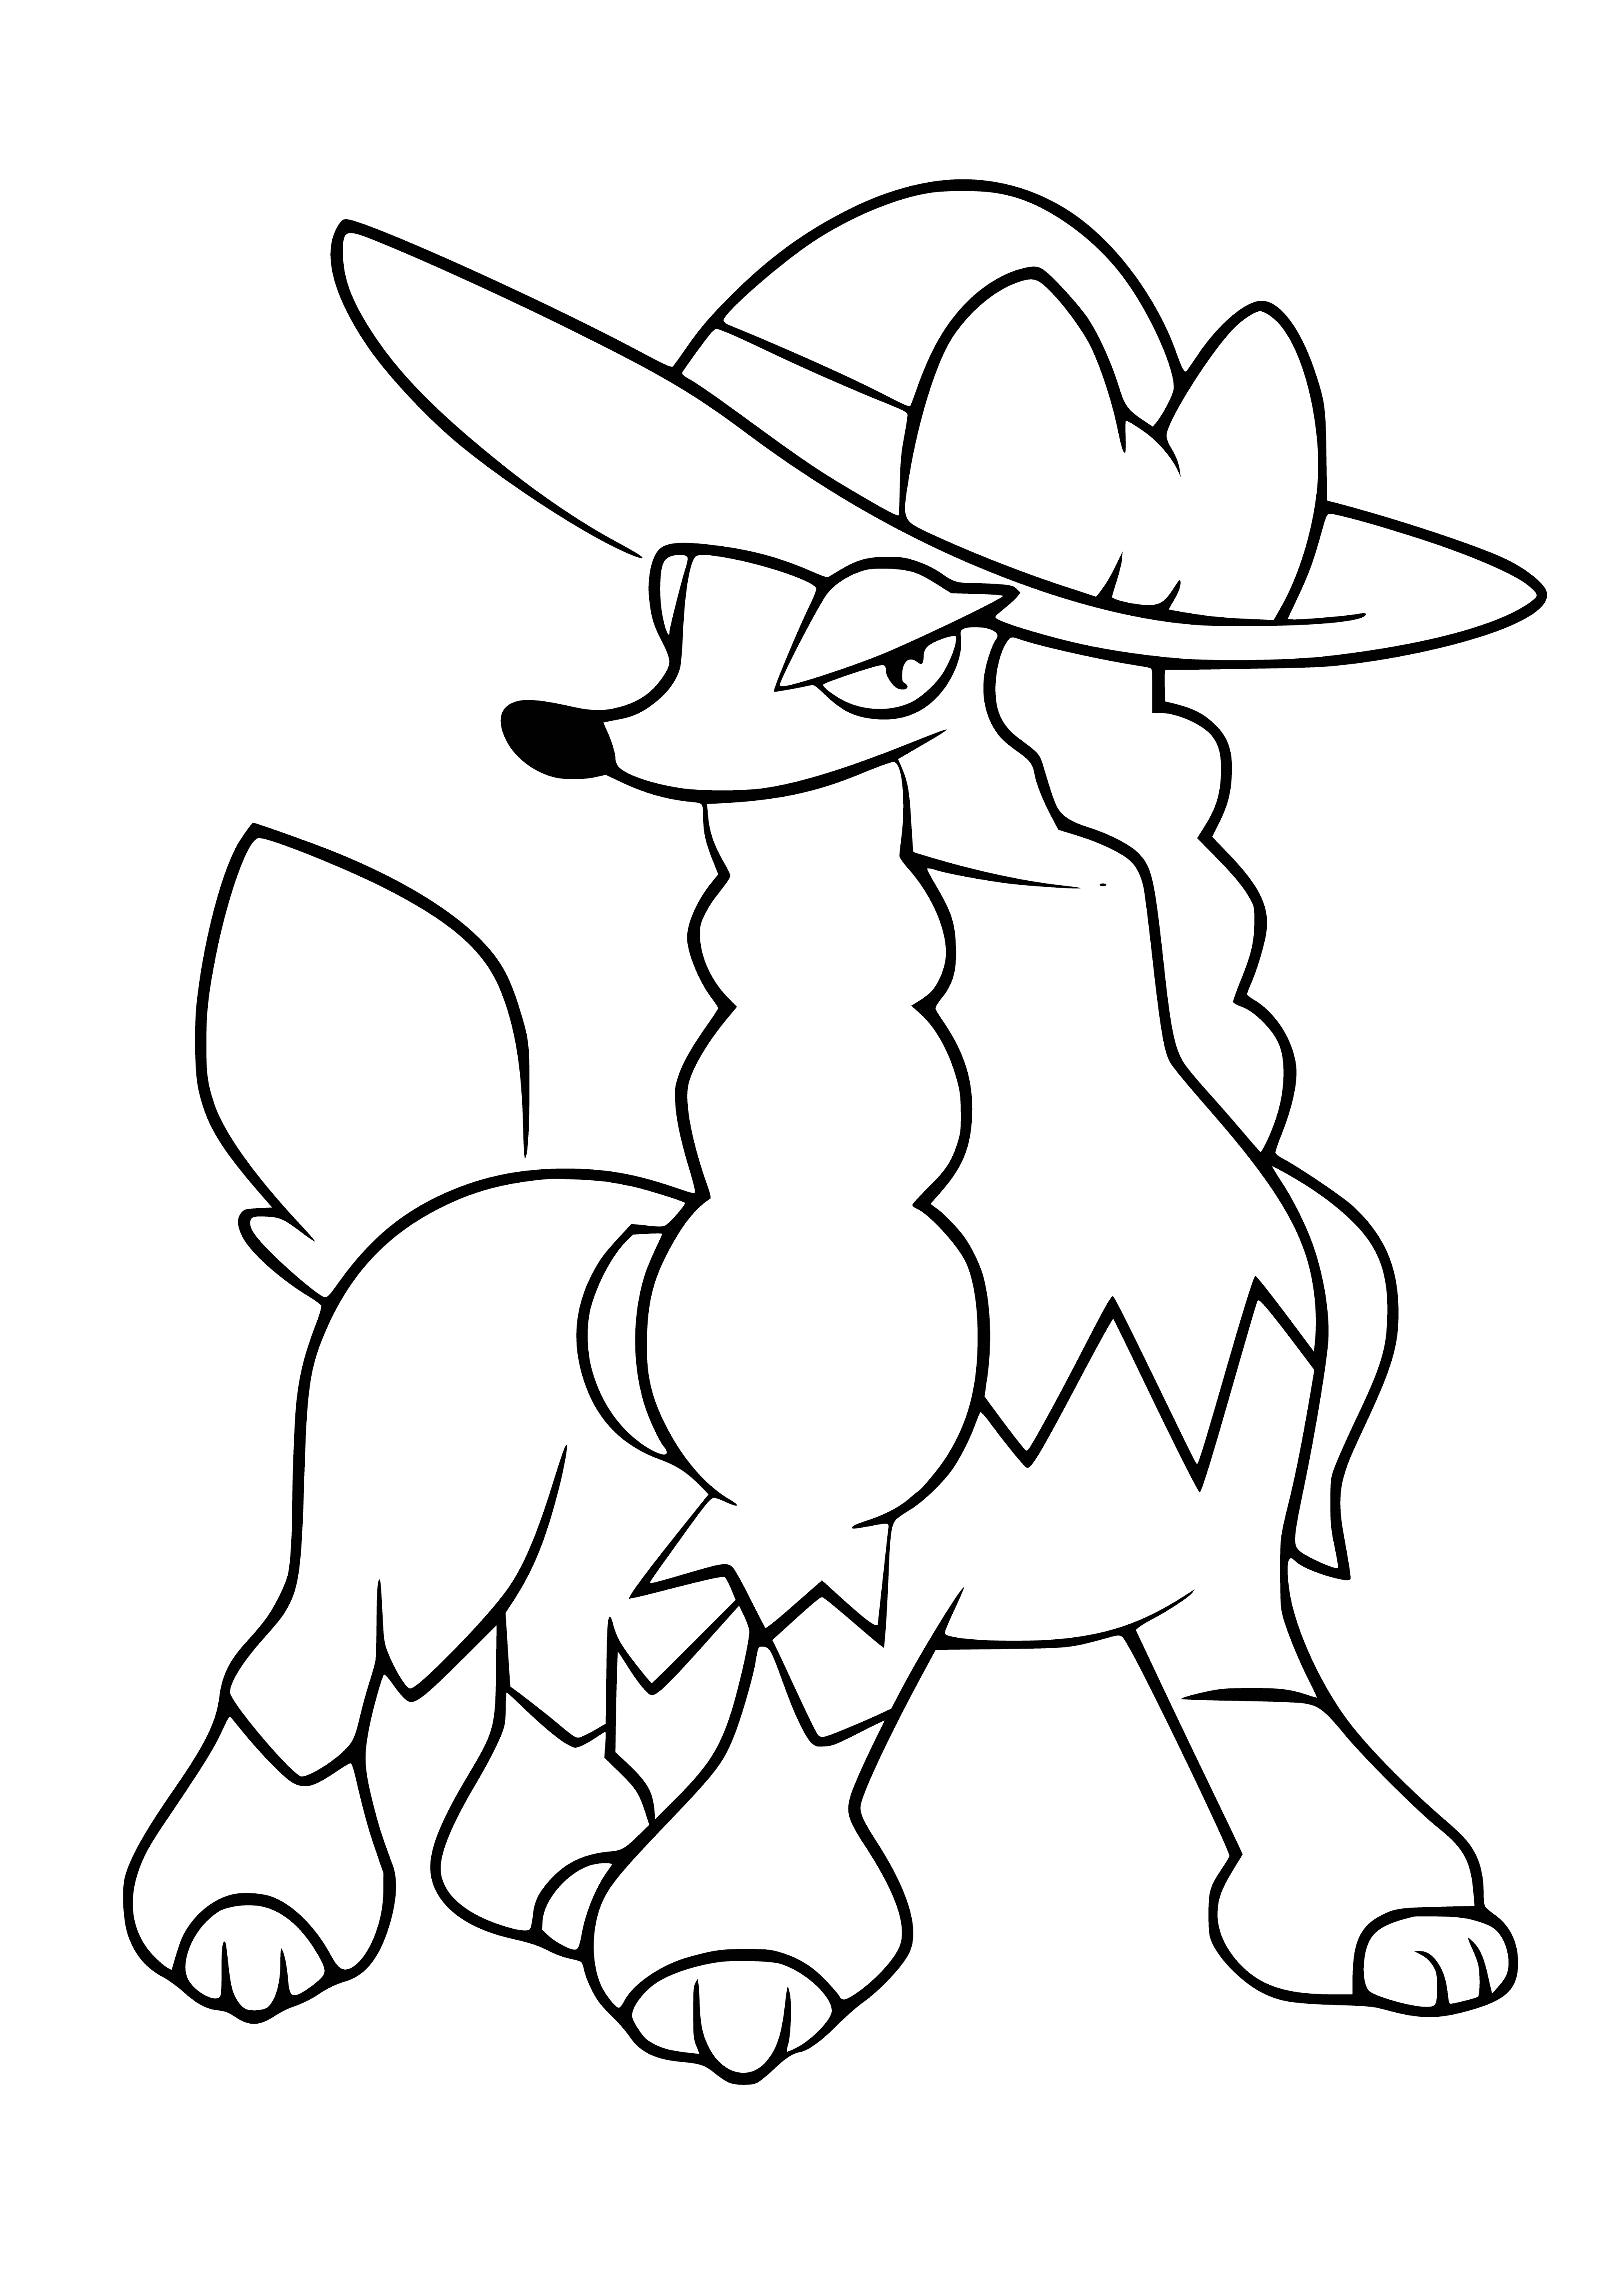 coloring page: Furfrou: Four-legged Pokemon with a white coat, black spots, and bristly long mane. Large, round head with black ears and nose.